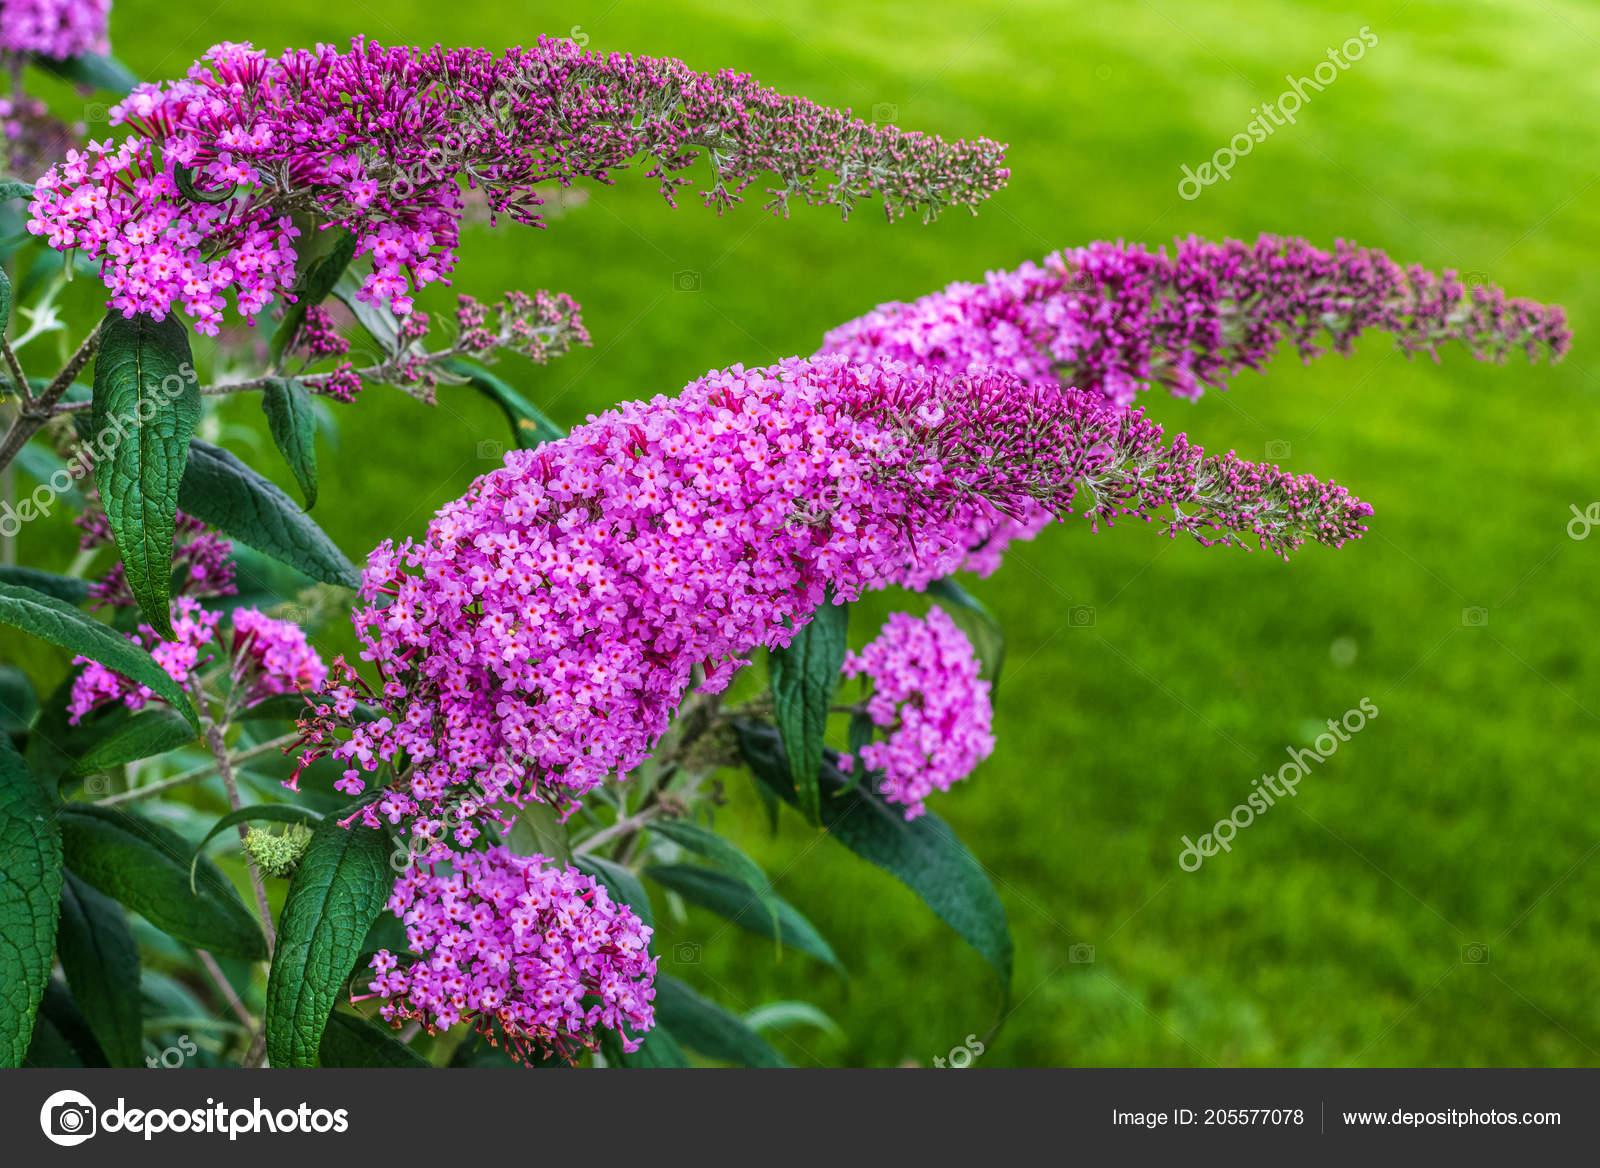 Summer Lilac Butterfly Bush Orange Eye Widely Used Ornamental Plant Stock Photo By C Inoplanium 205577078